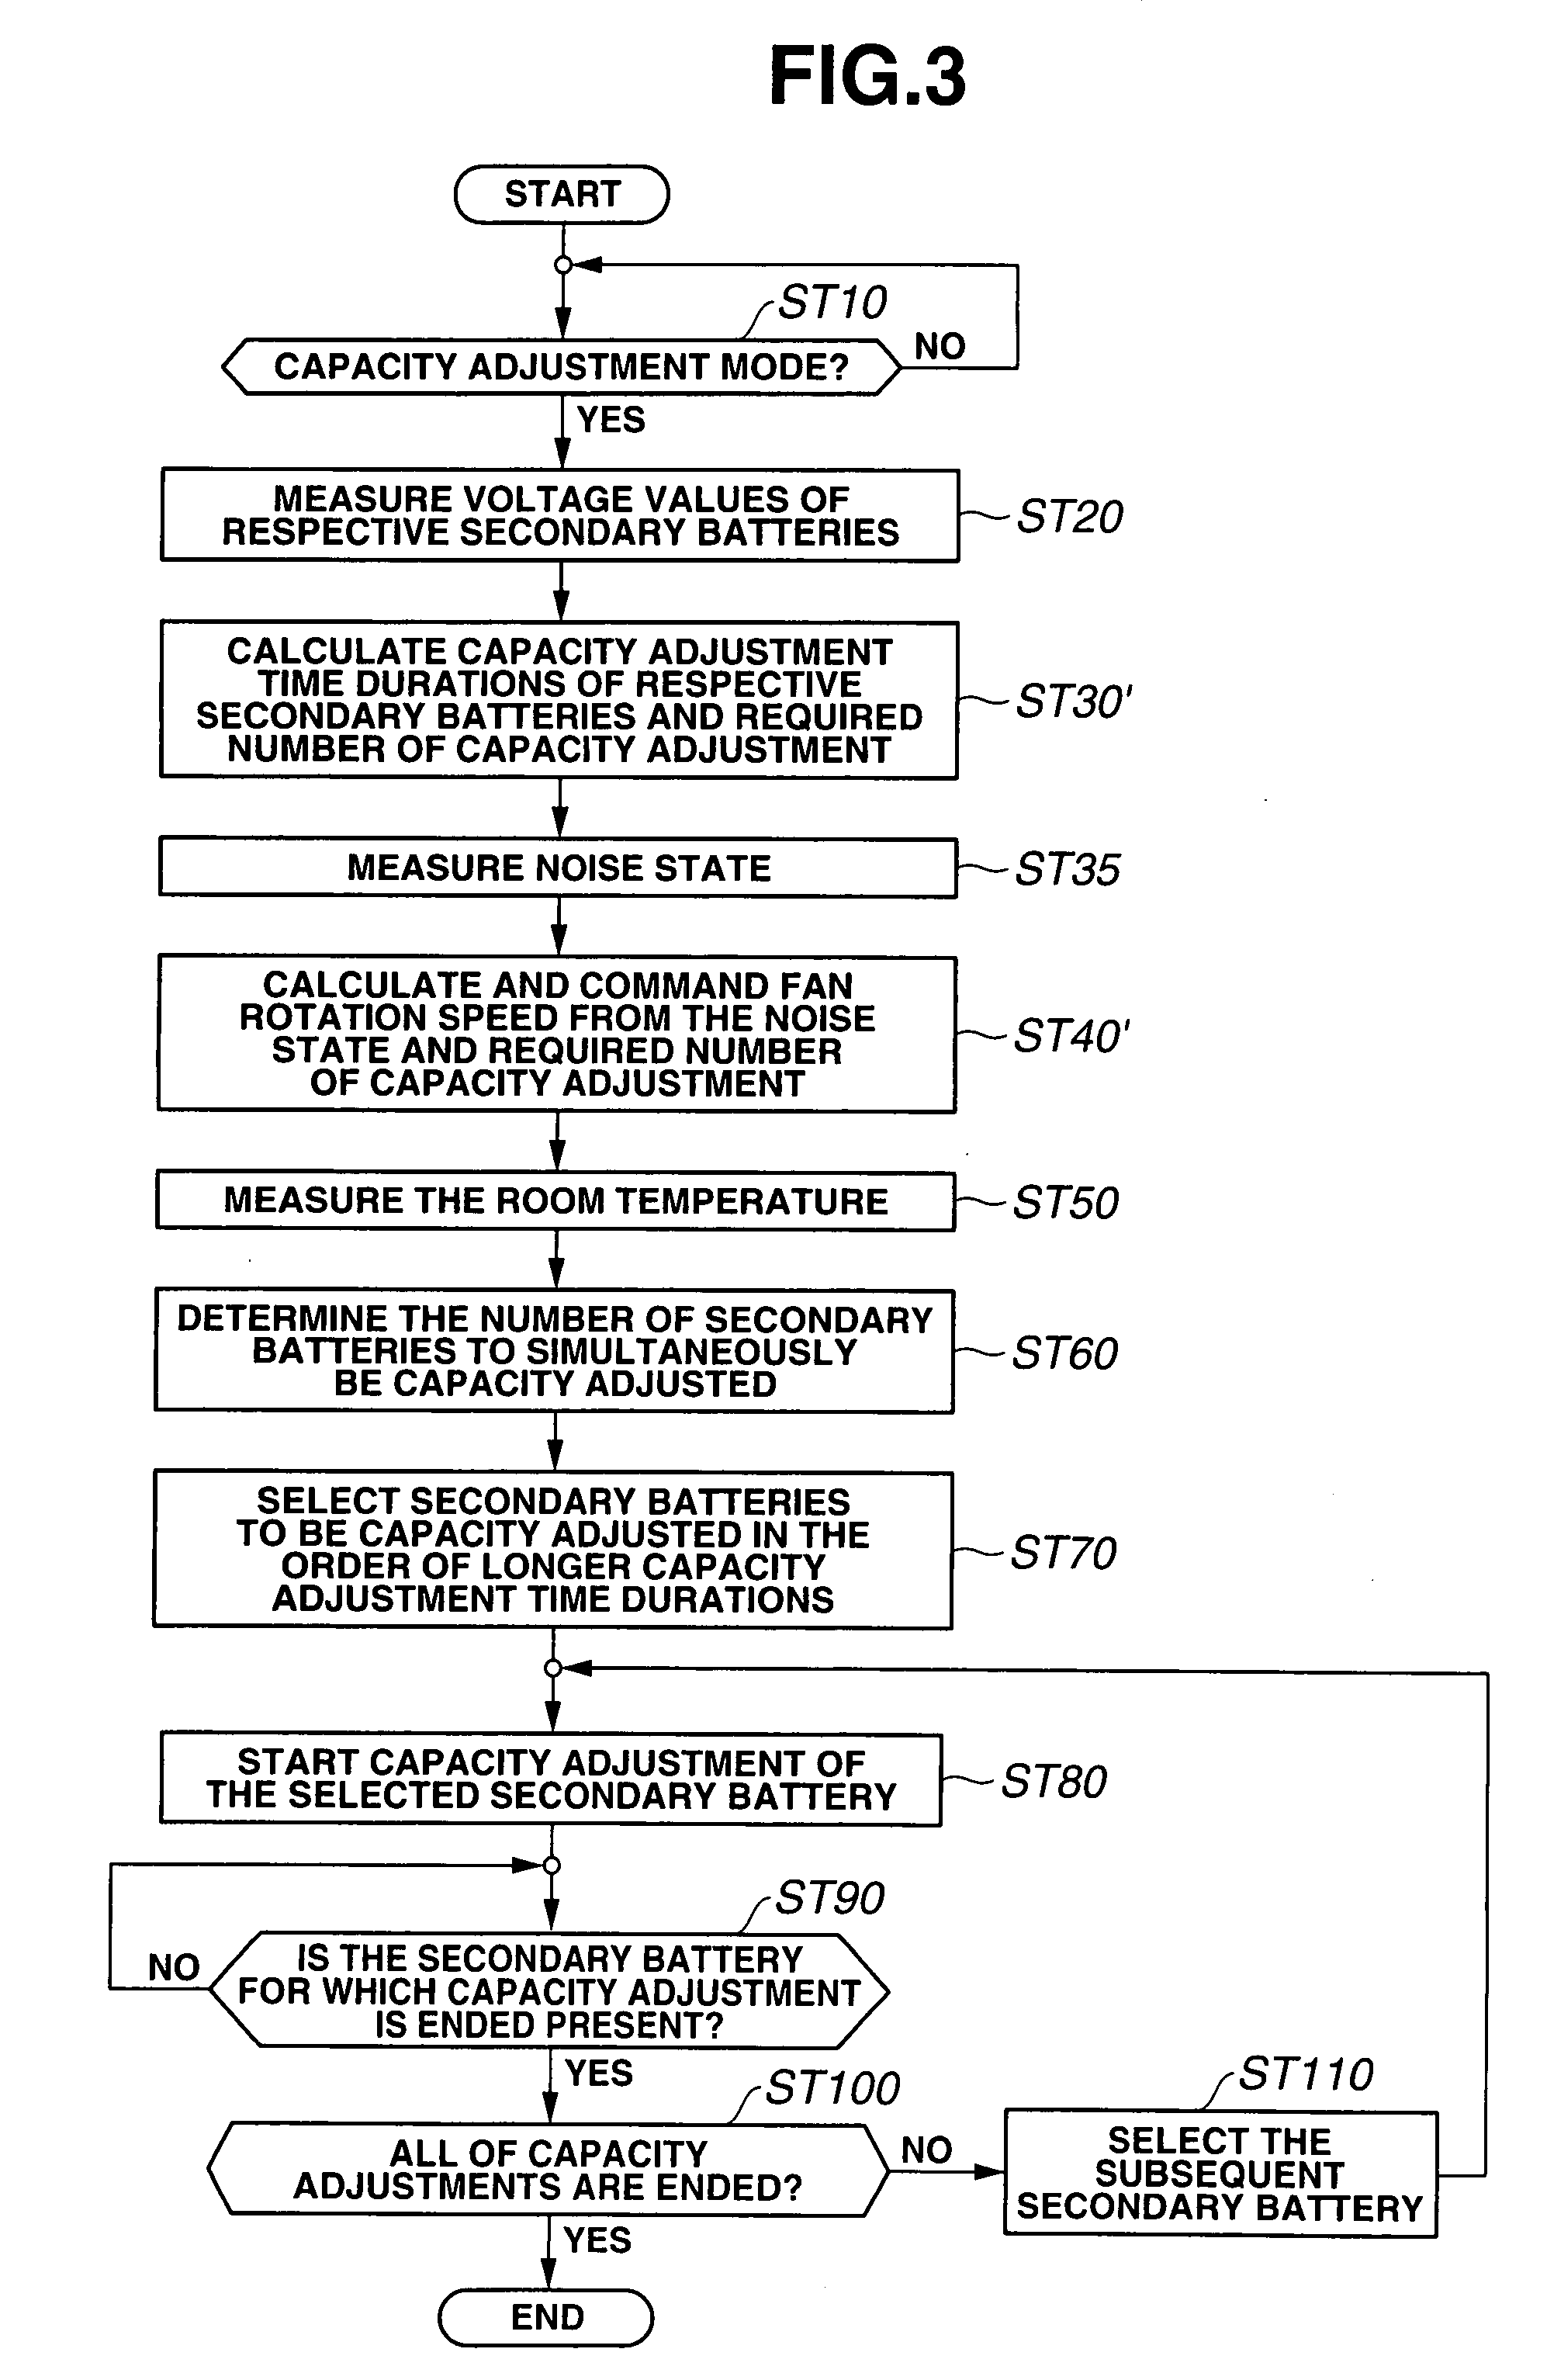 Capacity adjustment apparatus and method of secondary battery